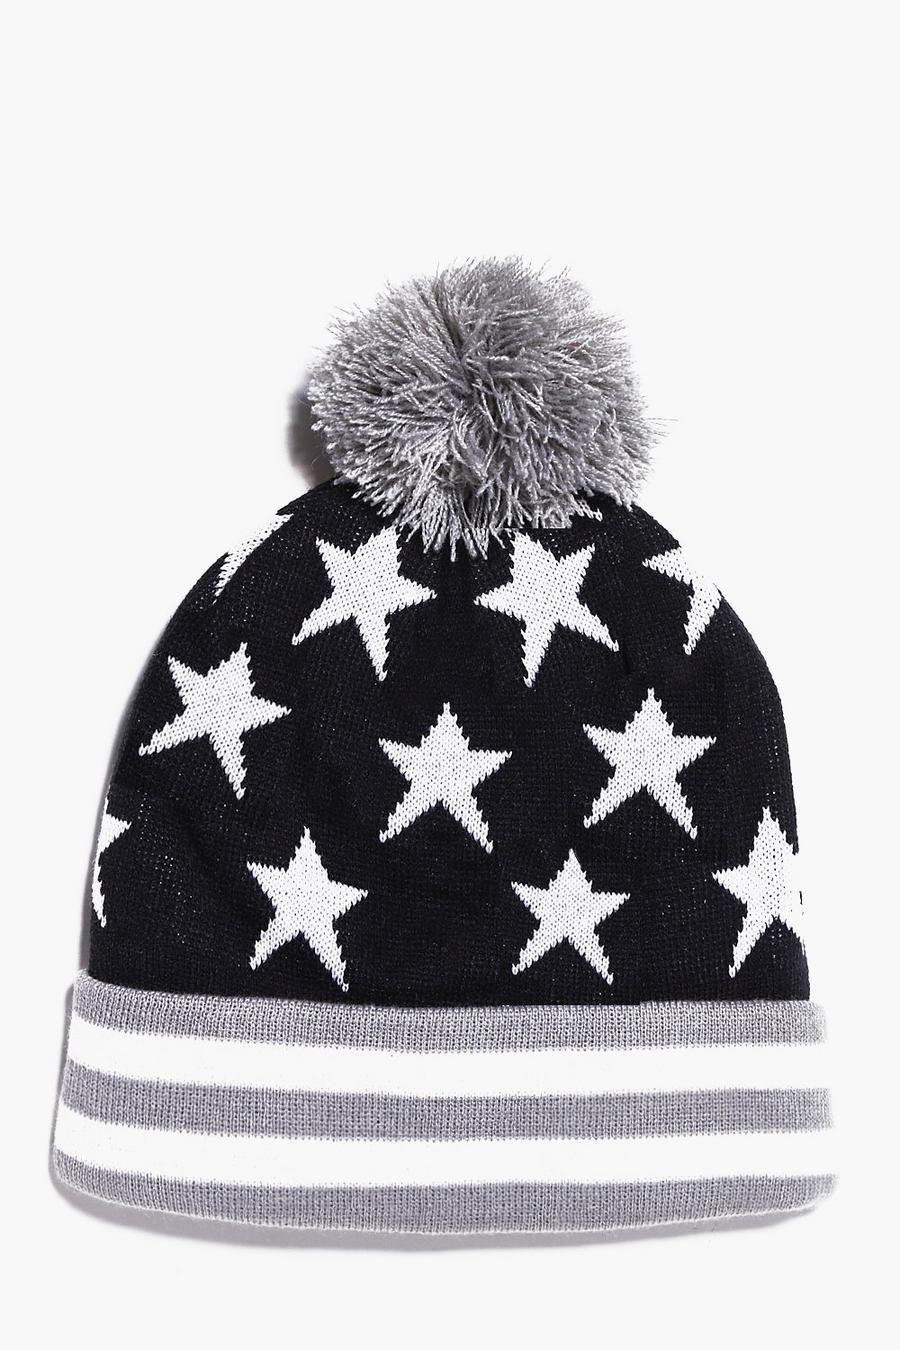 Stars And Stripes Bobble Hat image number 1